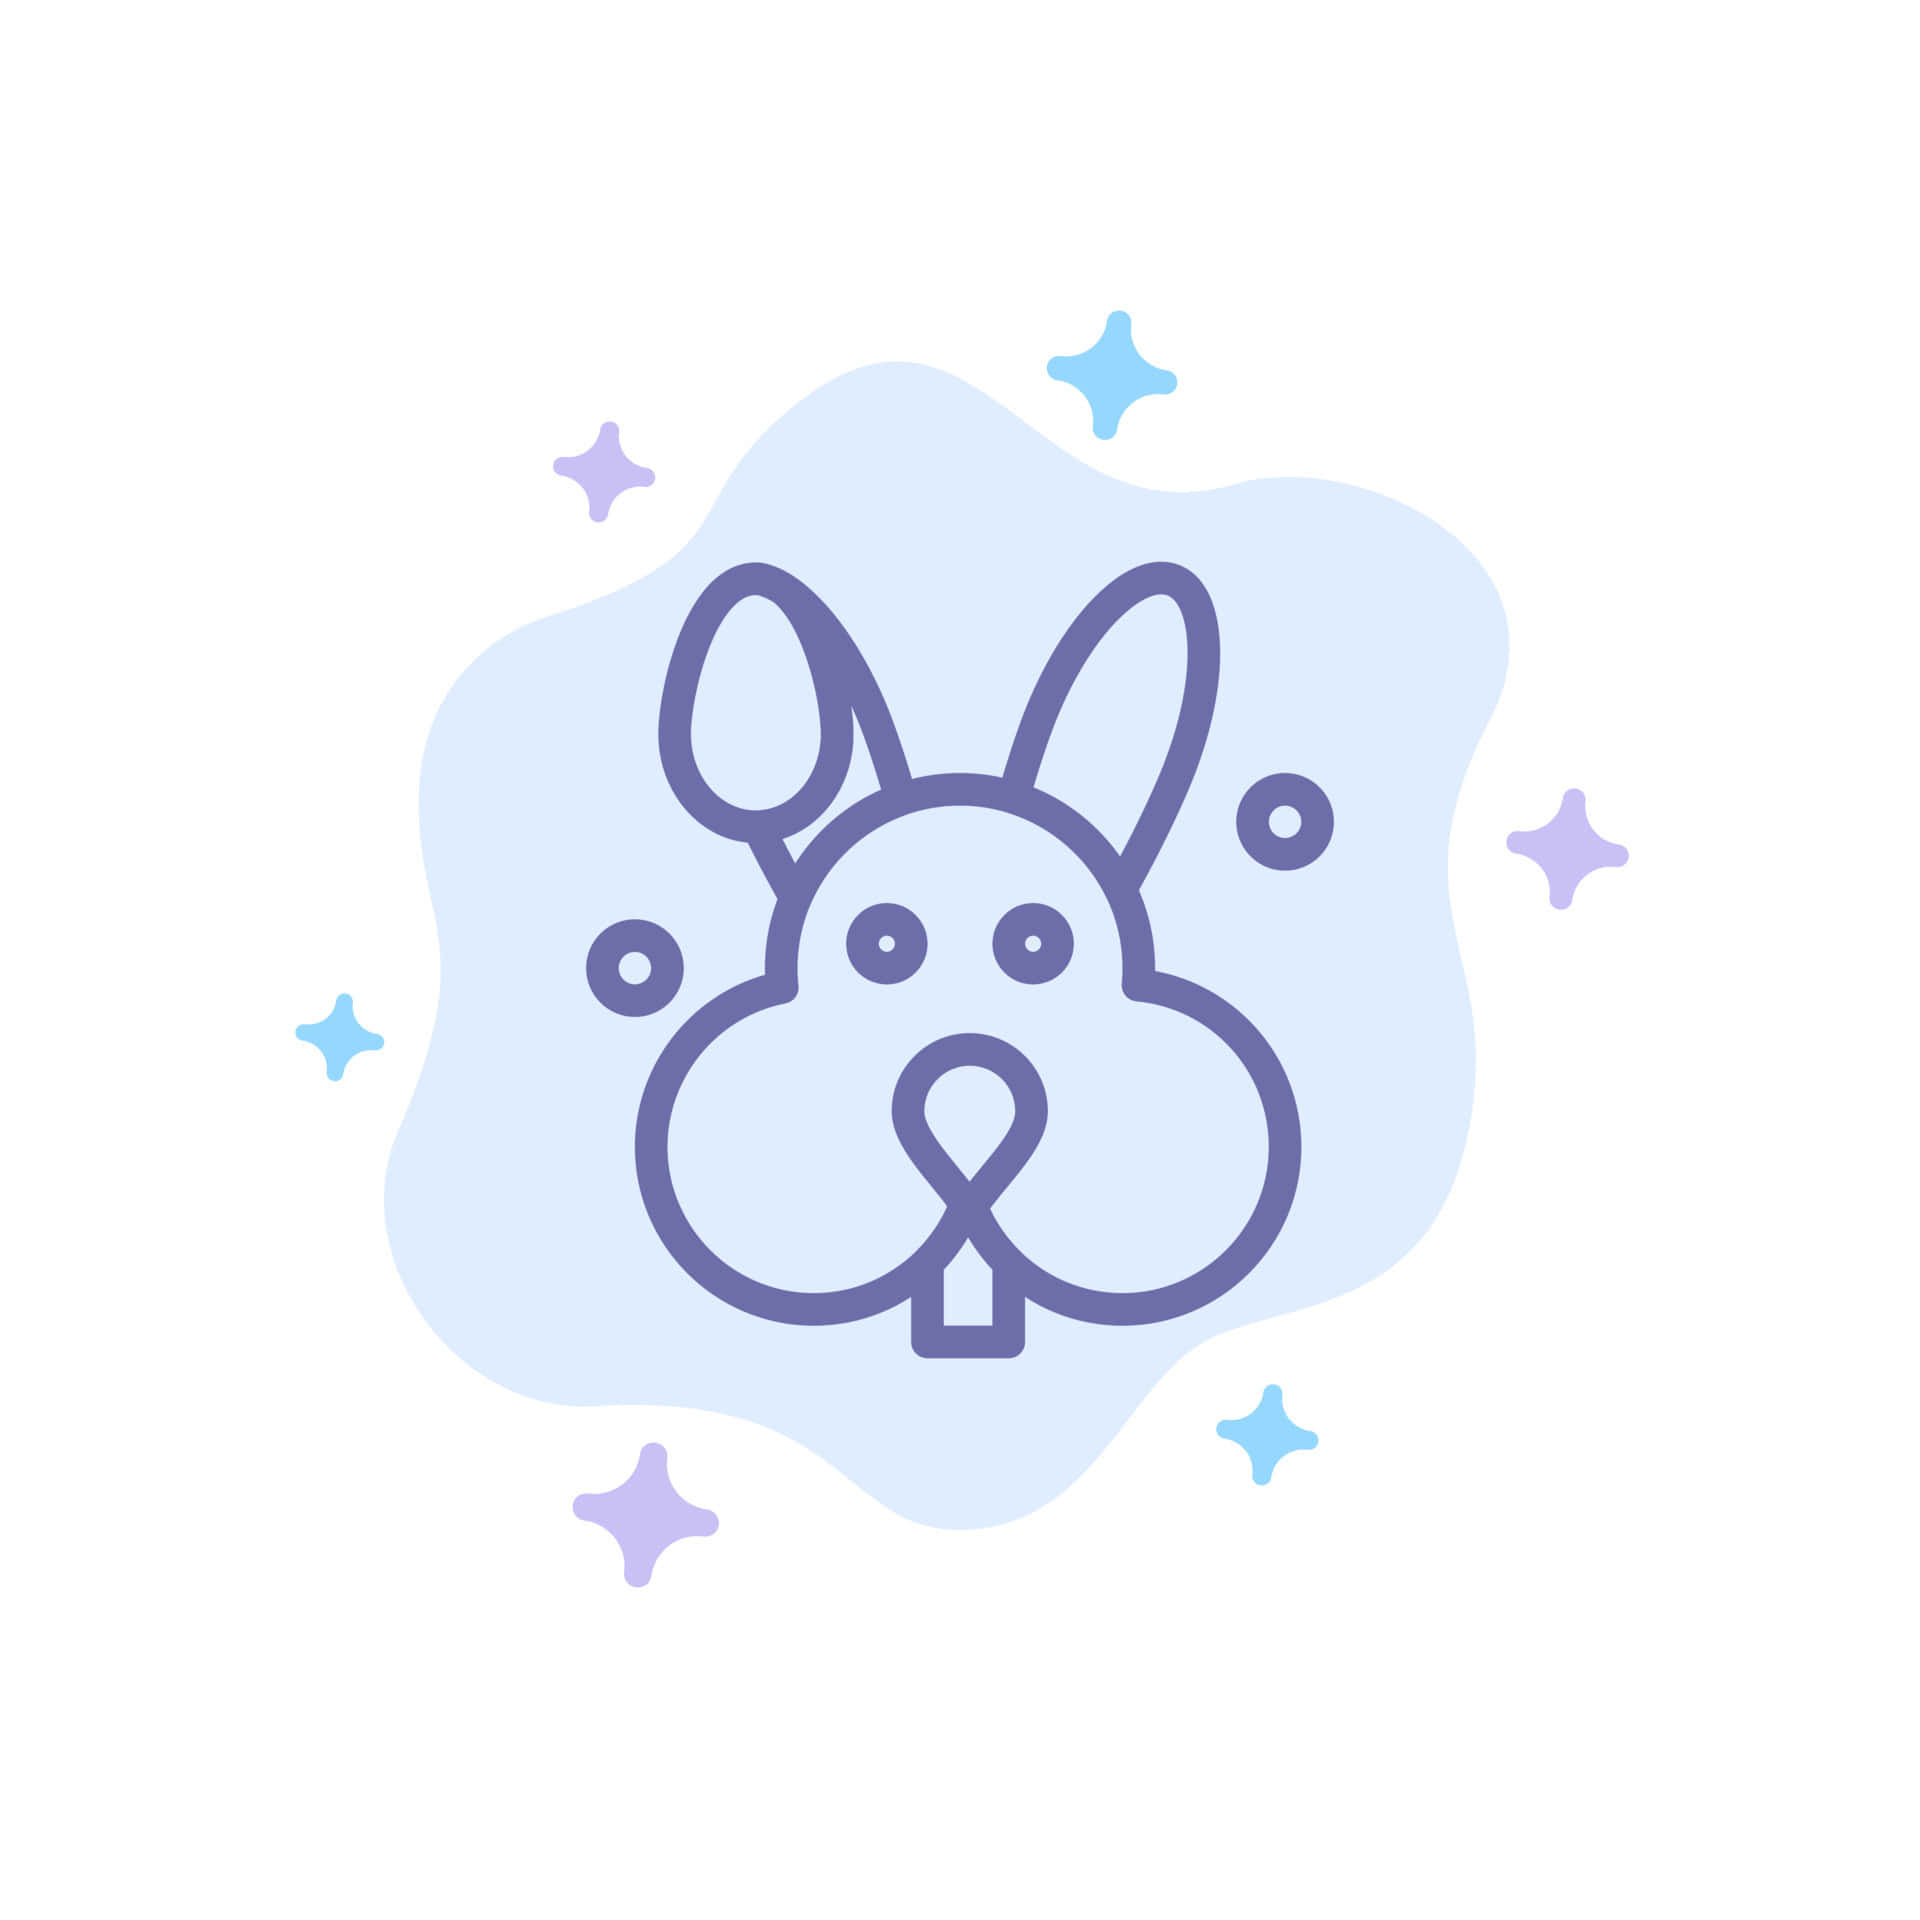 A Rabbit With A Nose And Ears On A White Background